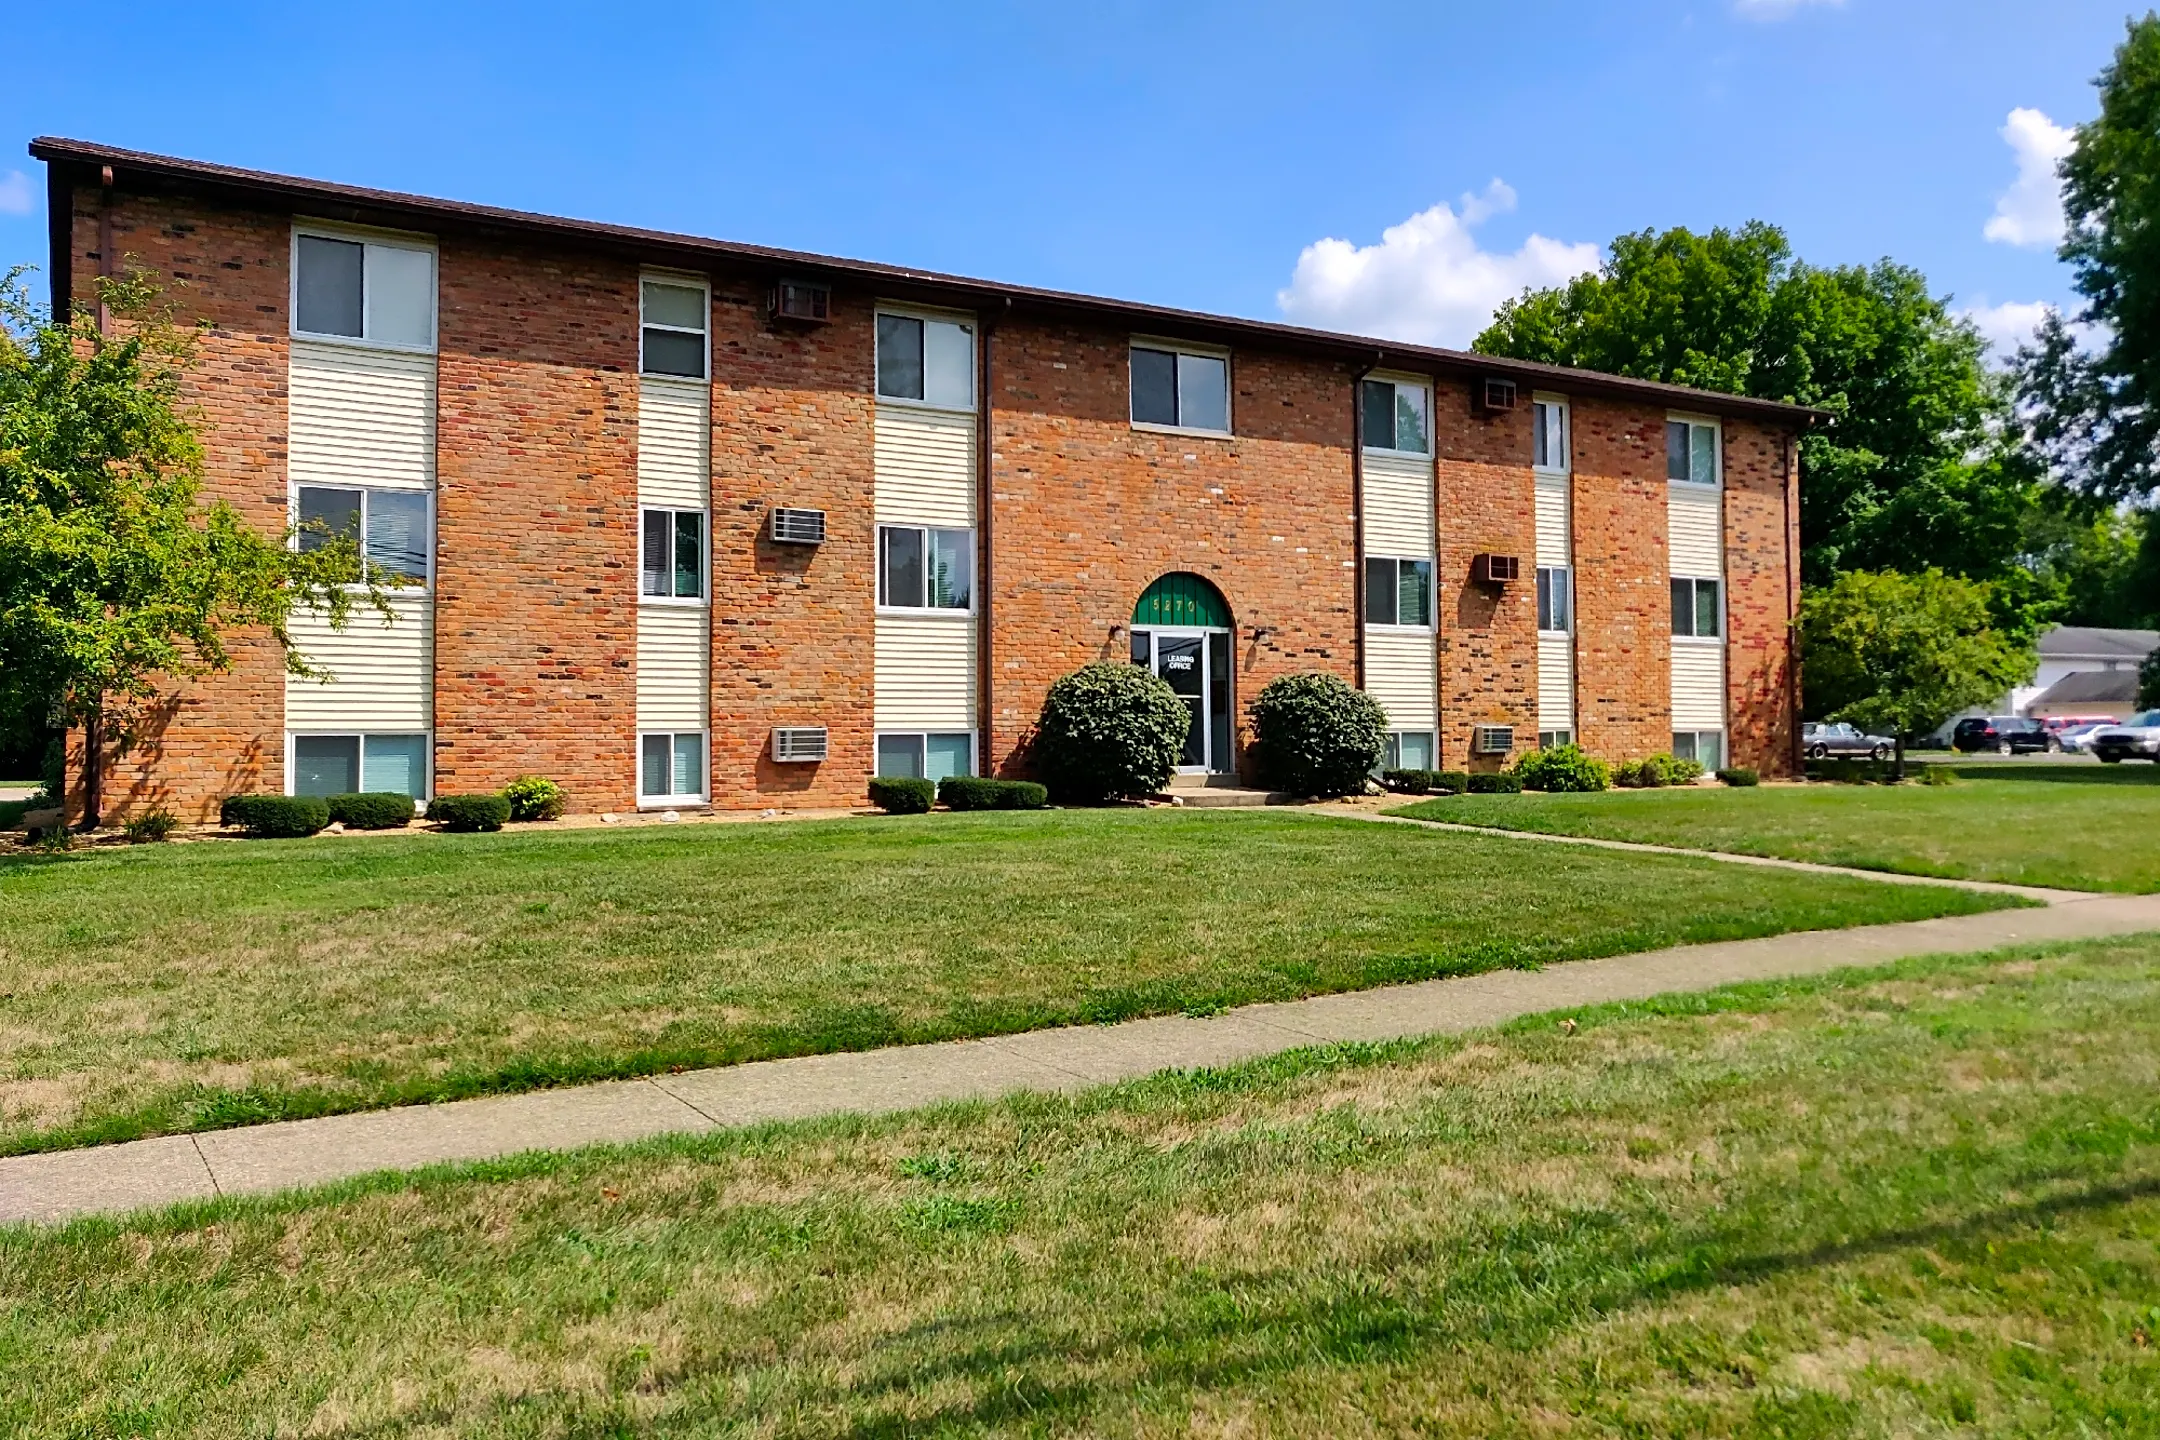 Pool - Southgate Apartments - Fairfield, OH